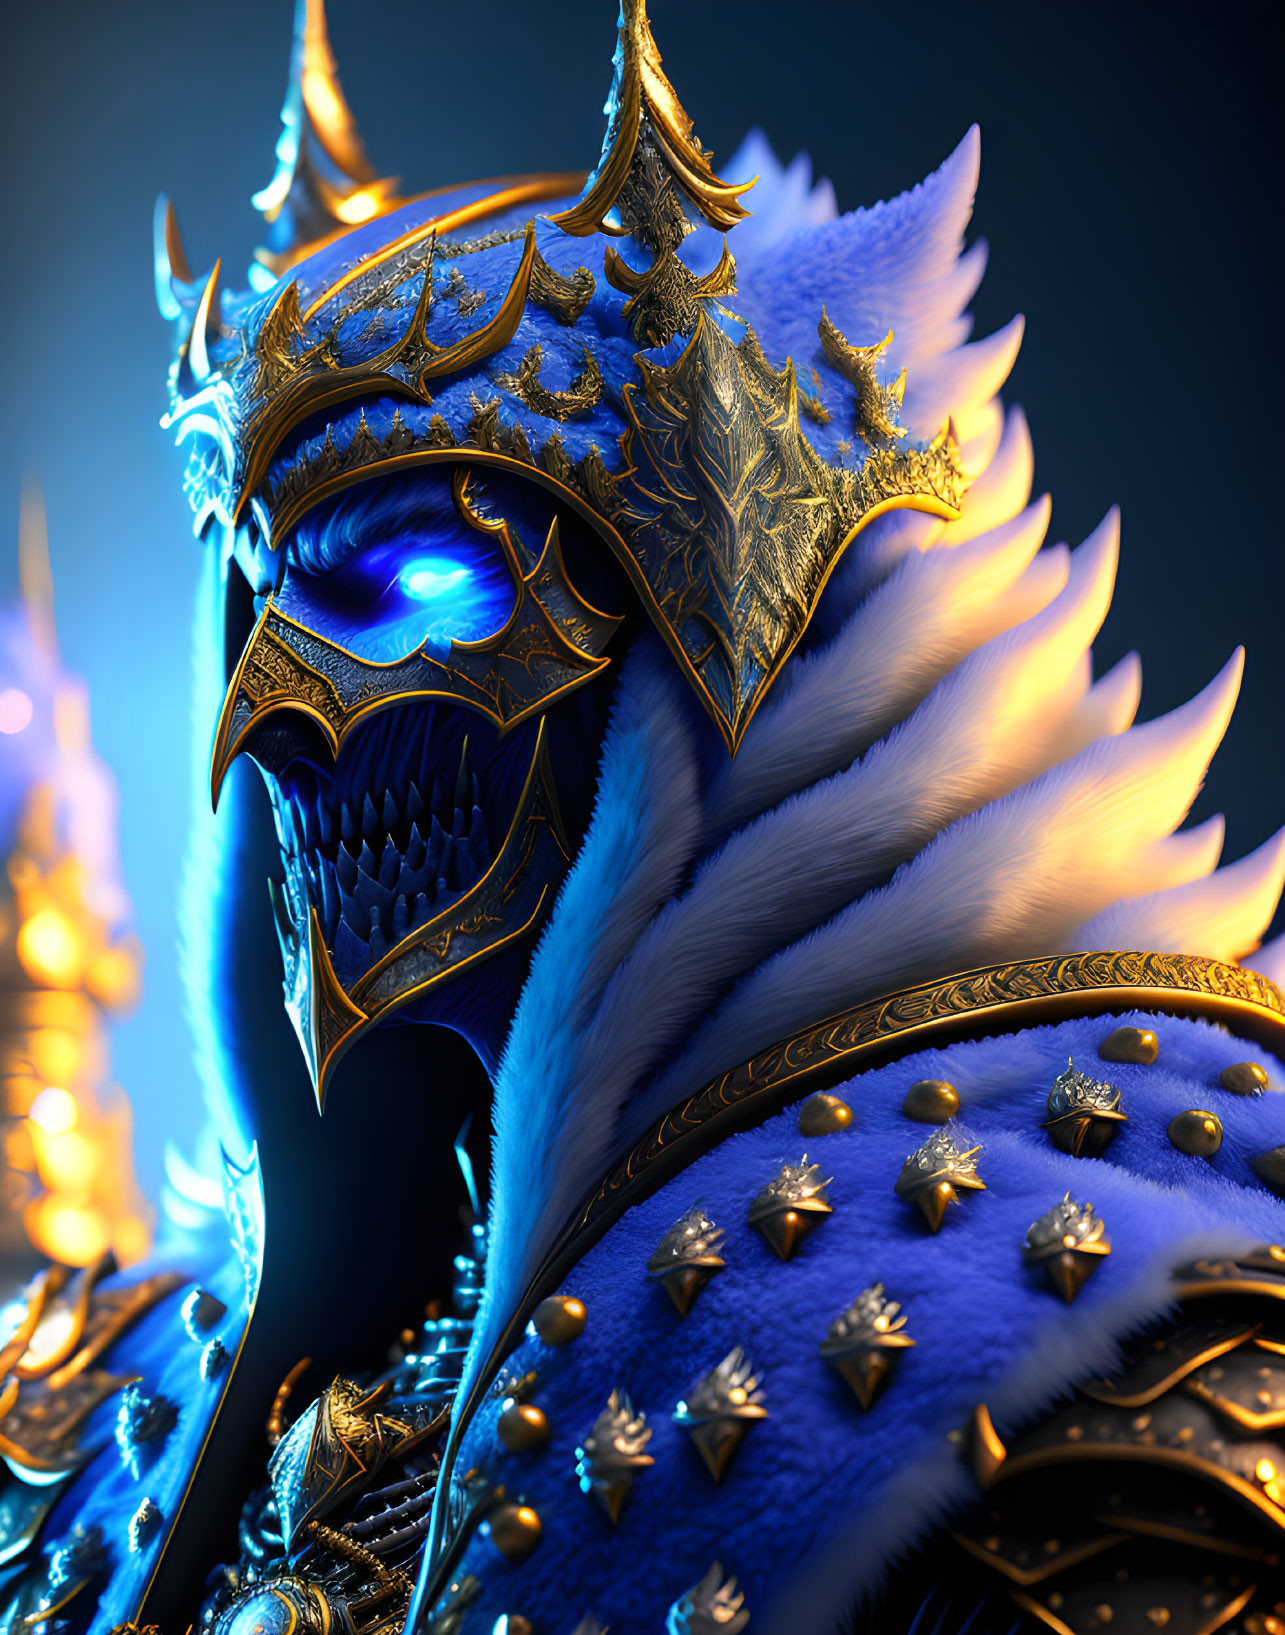 Fantasy armor design with blue feathers, golden spikes, and glowing blue-eyed mask